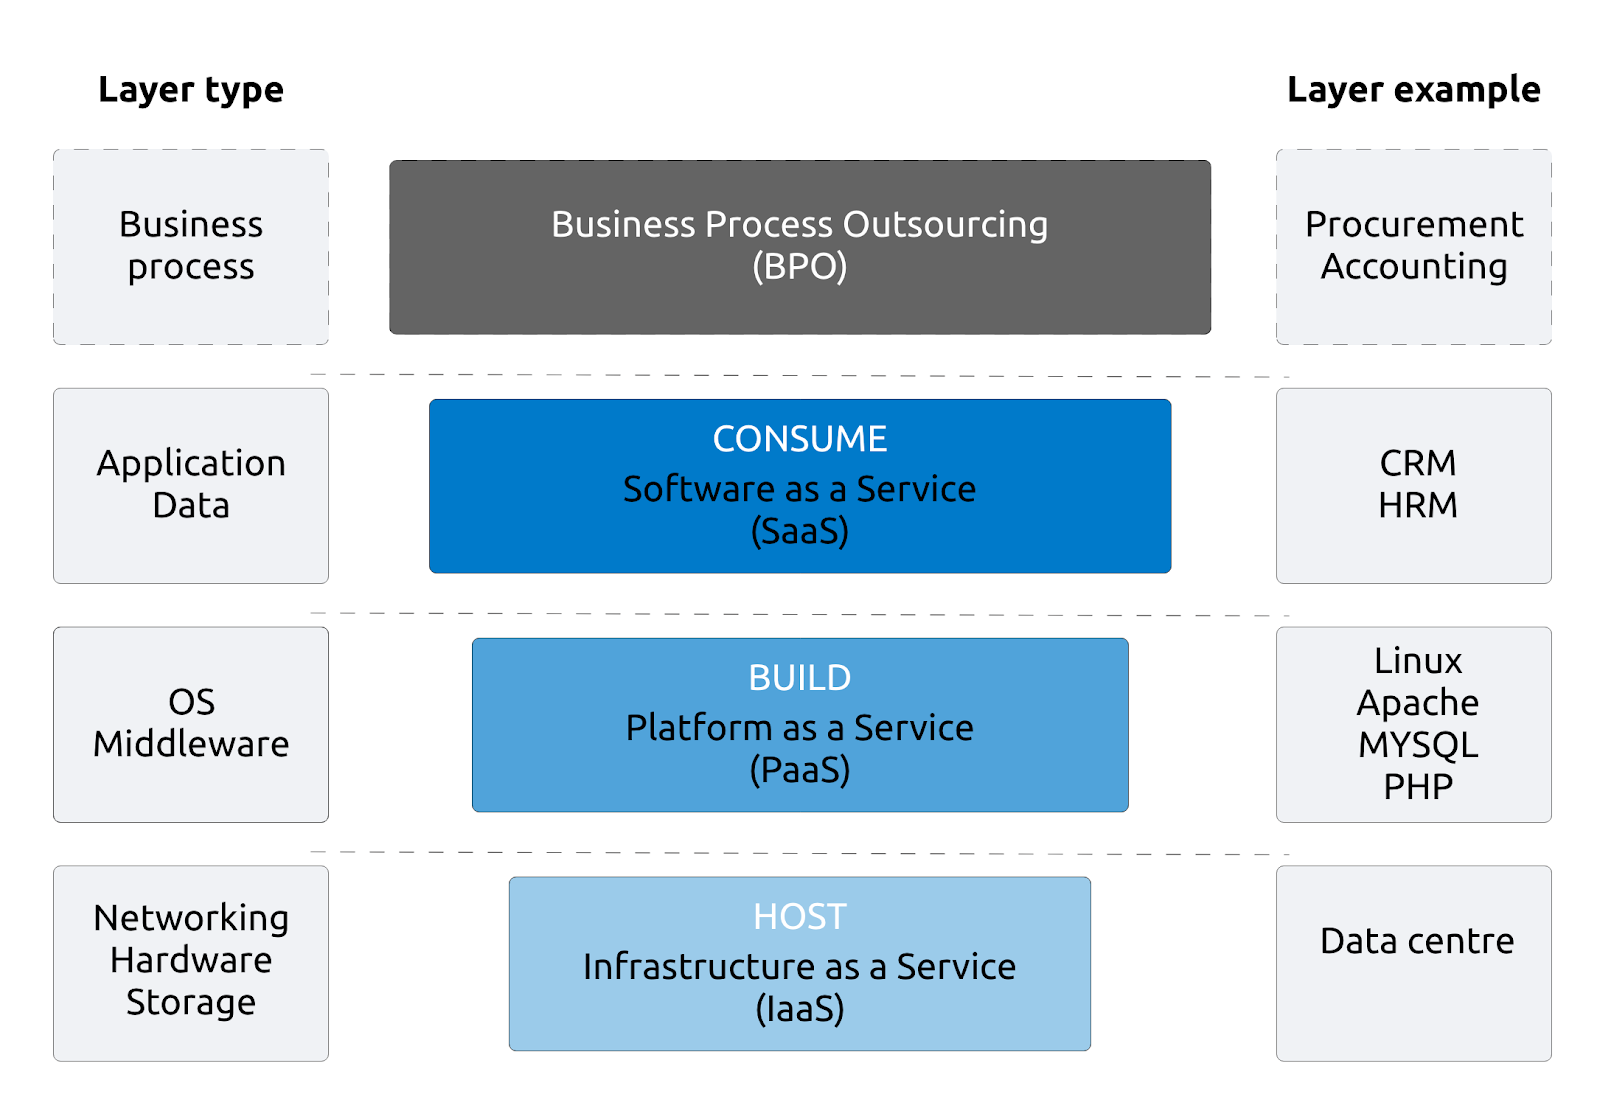 Illustration of the different cloud layer types: BPO, SaaS, PaaS and IaaS